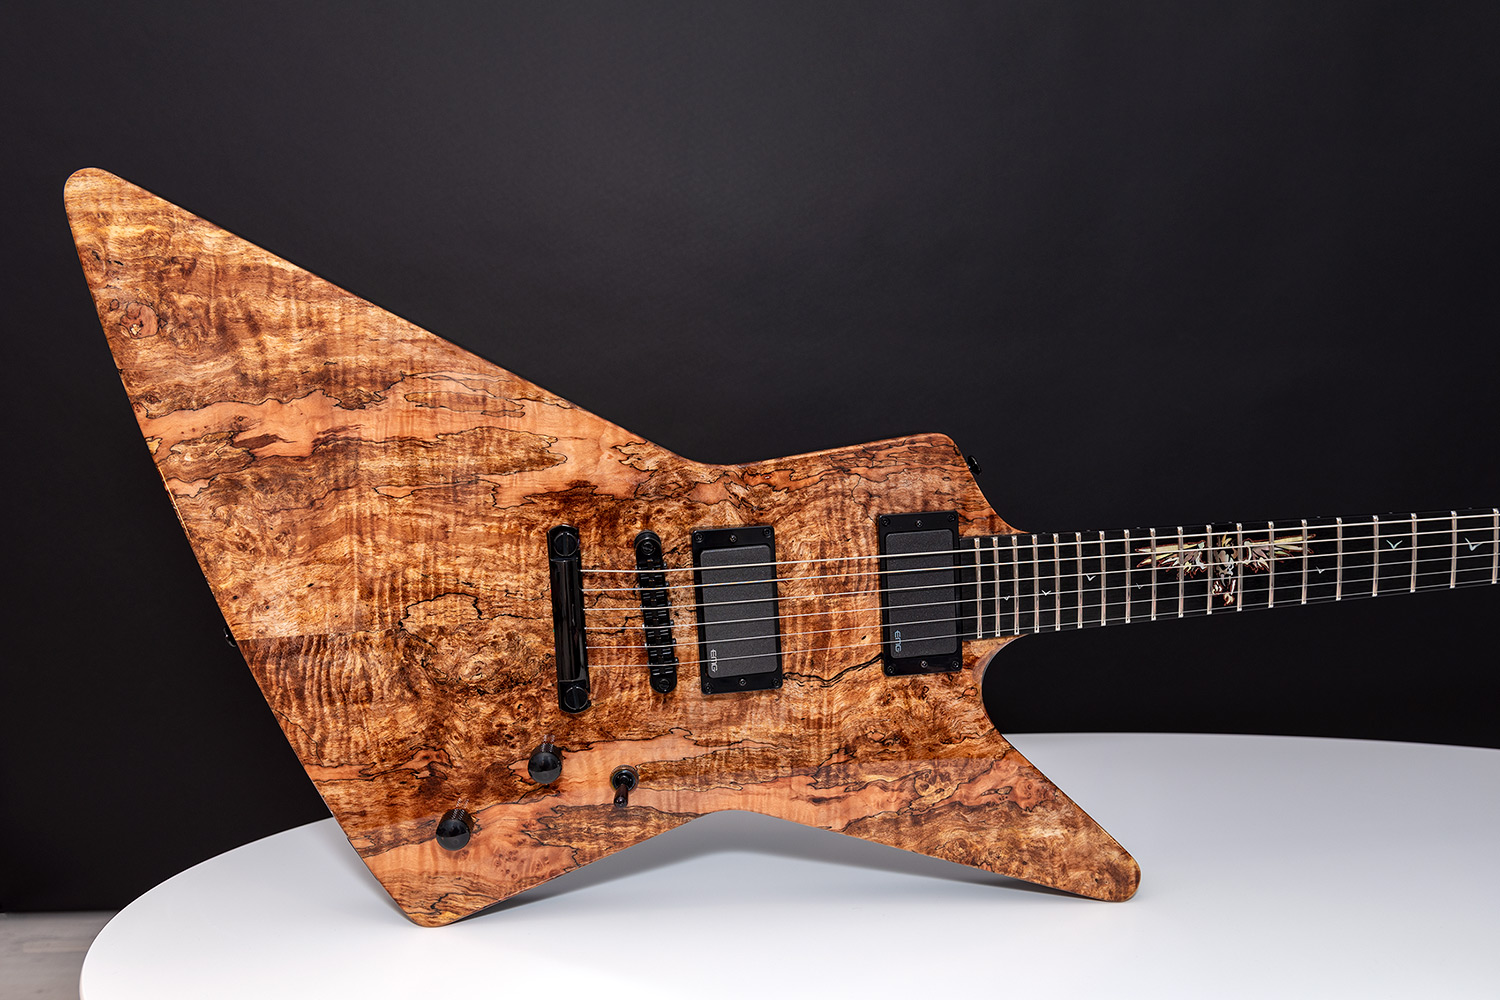 This guitar is called Vulturus and is a tribute to Metallica band Augustin is a luthier with over 15 years of experience, specializing in custom guitars